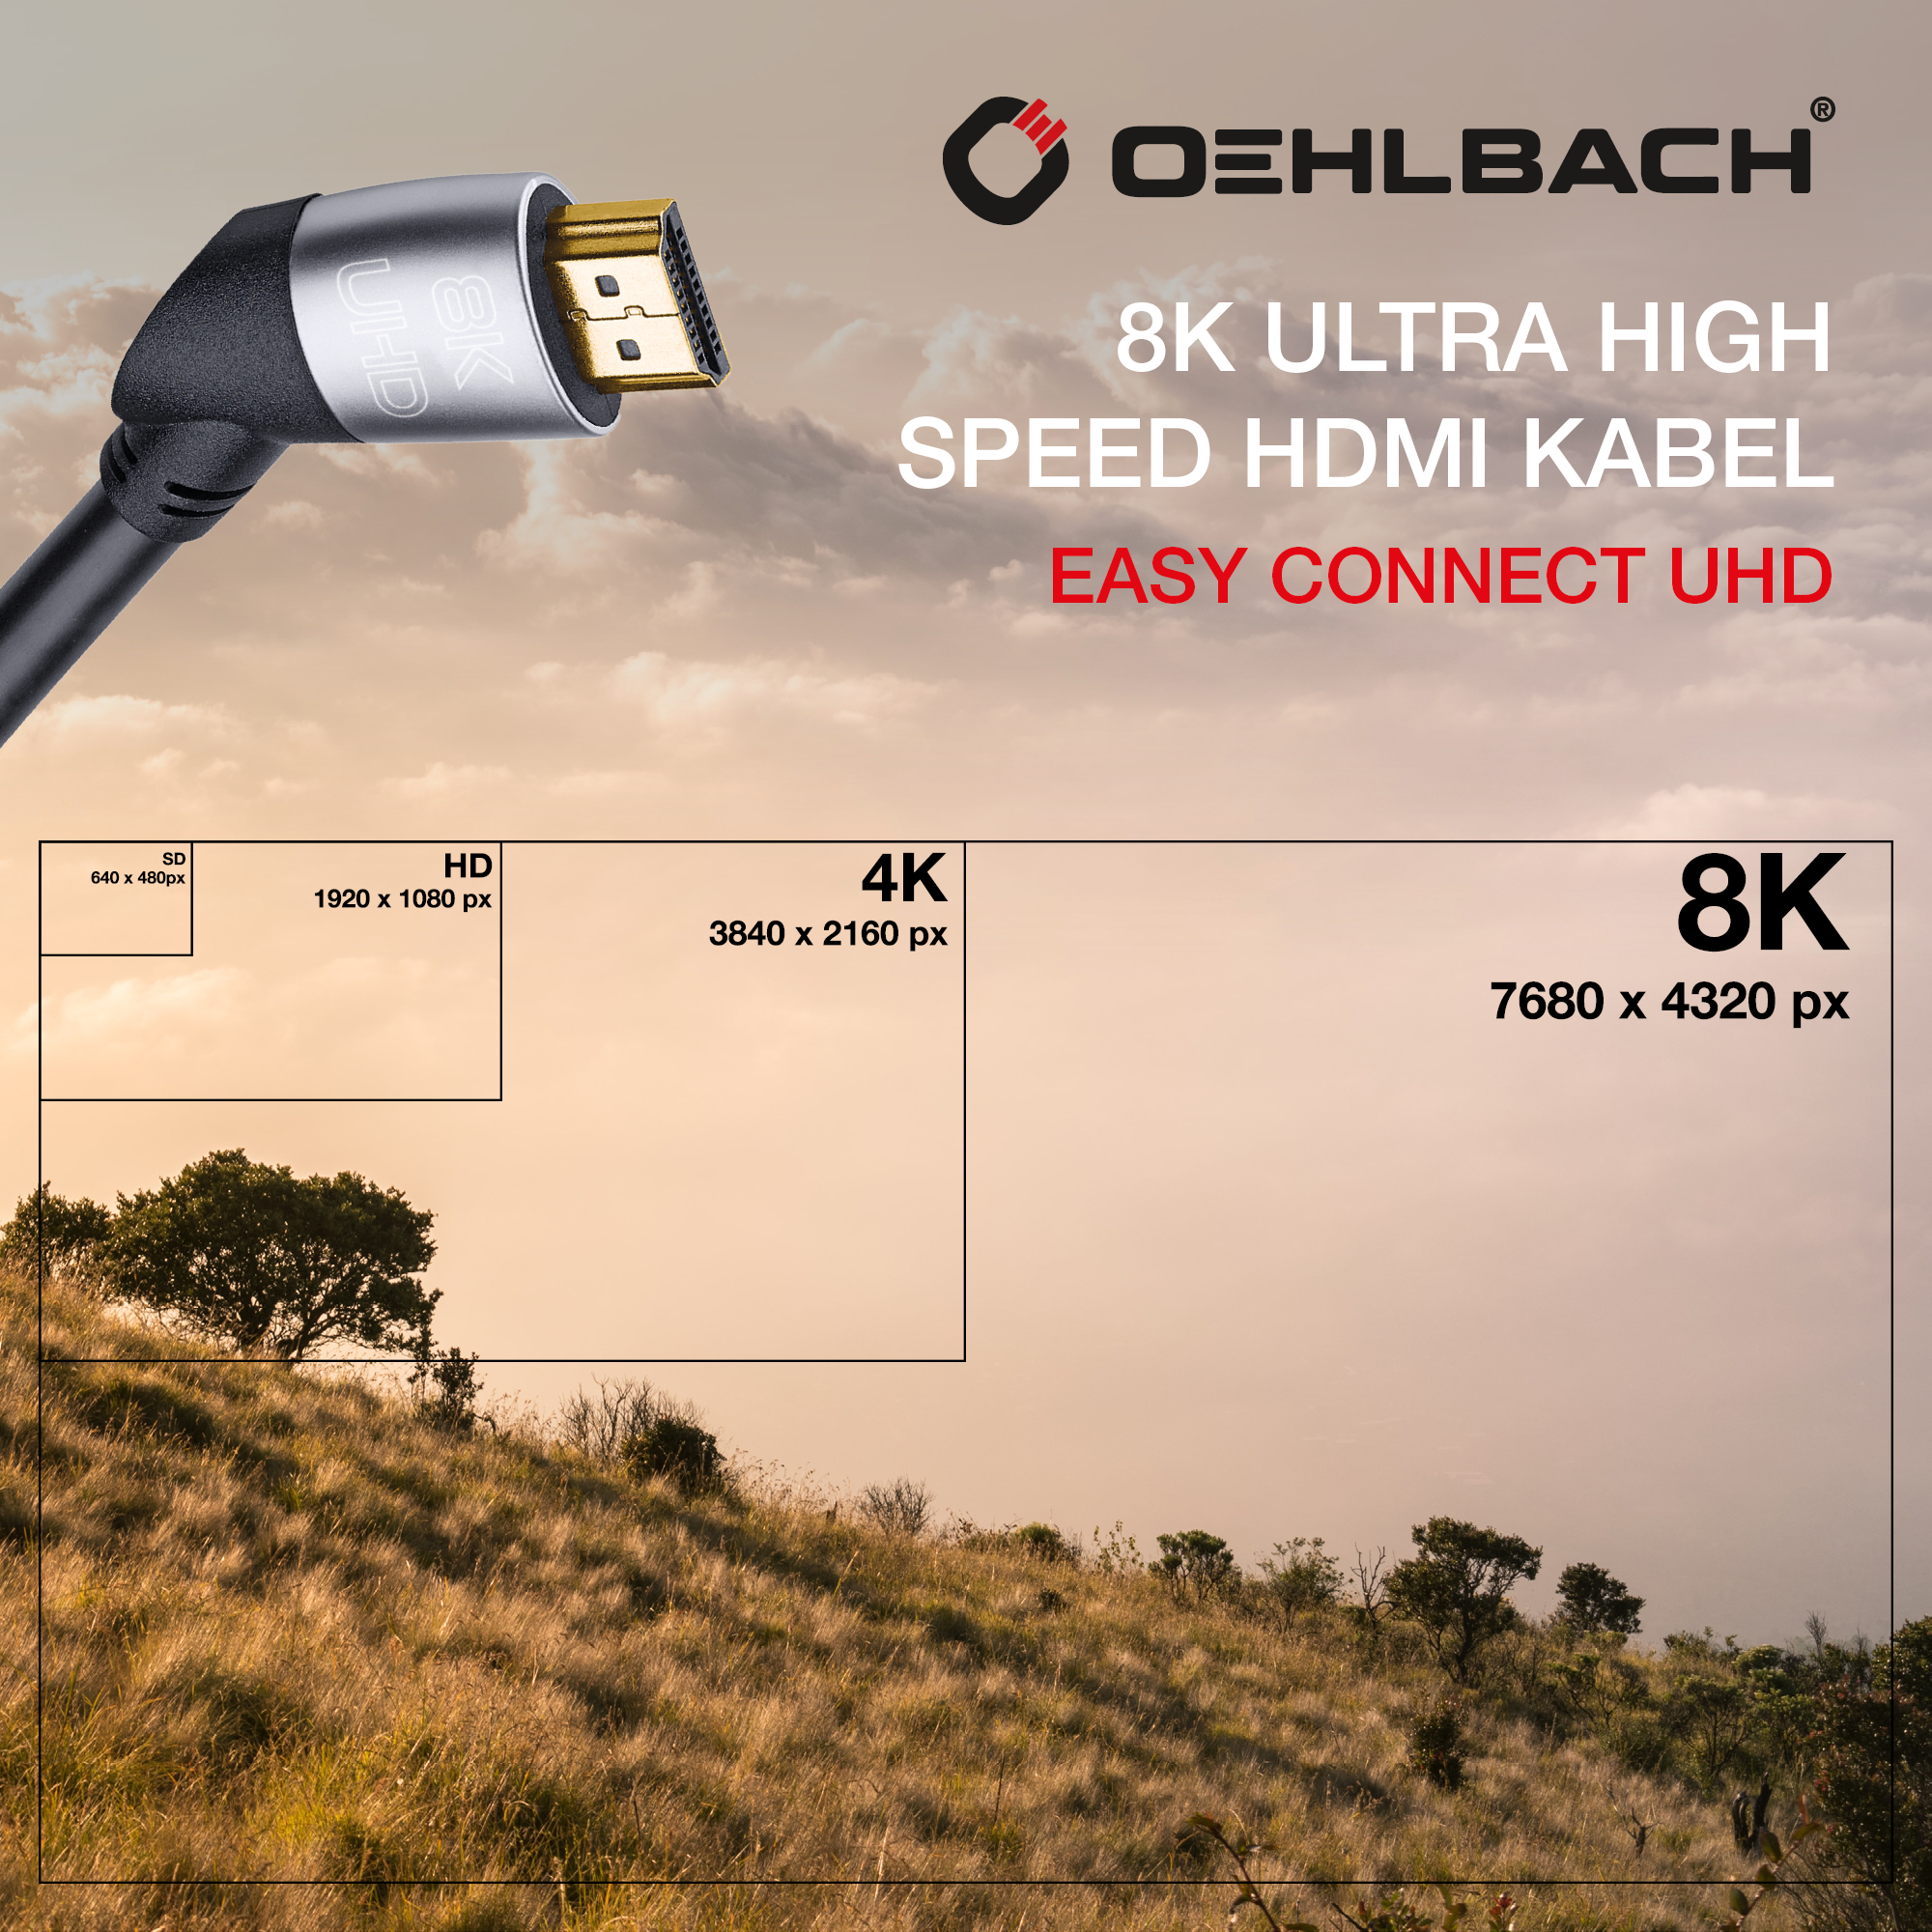 m Kabel, Connect Easy OEHLBACH HDMI, 2 HDMI